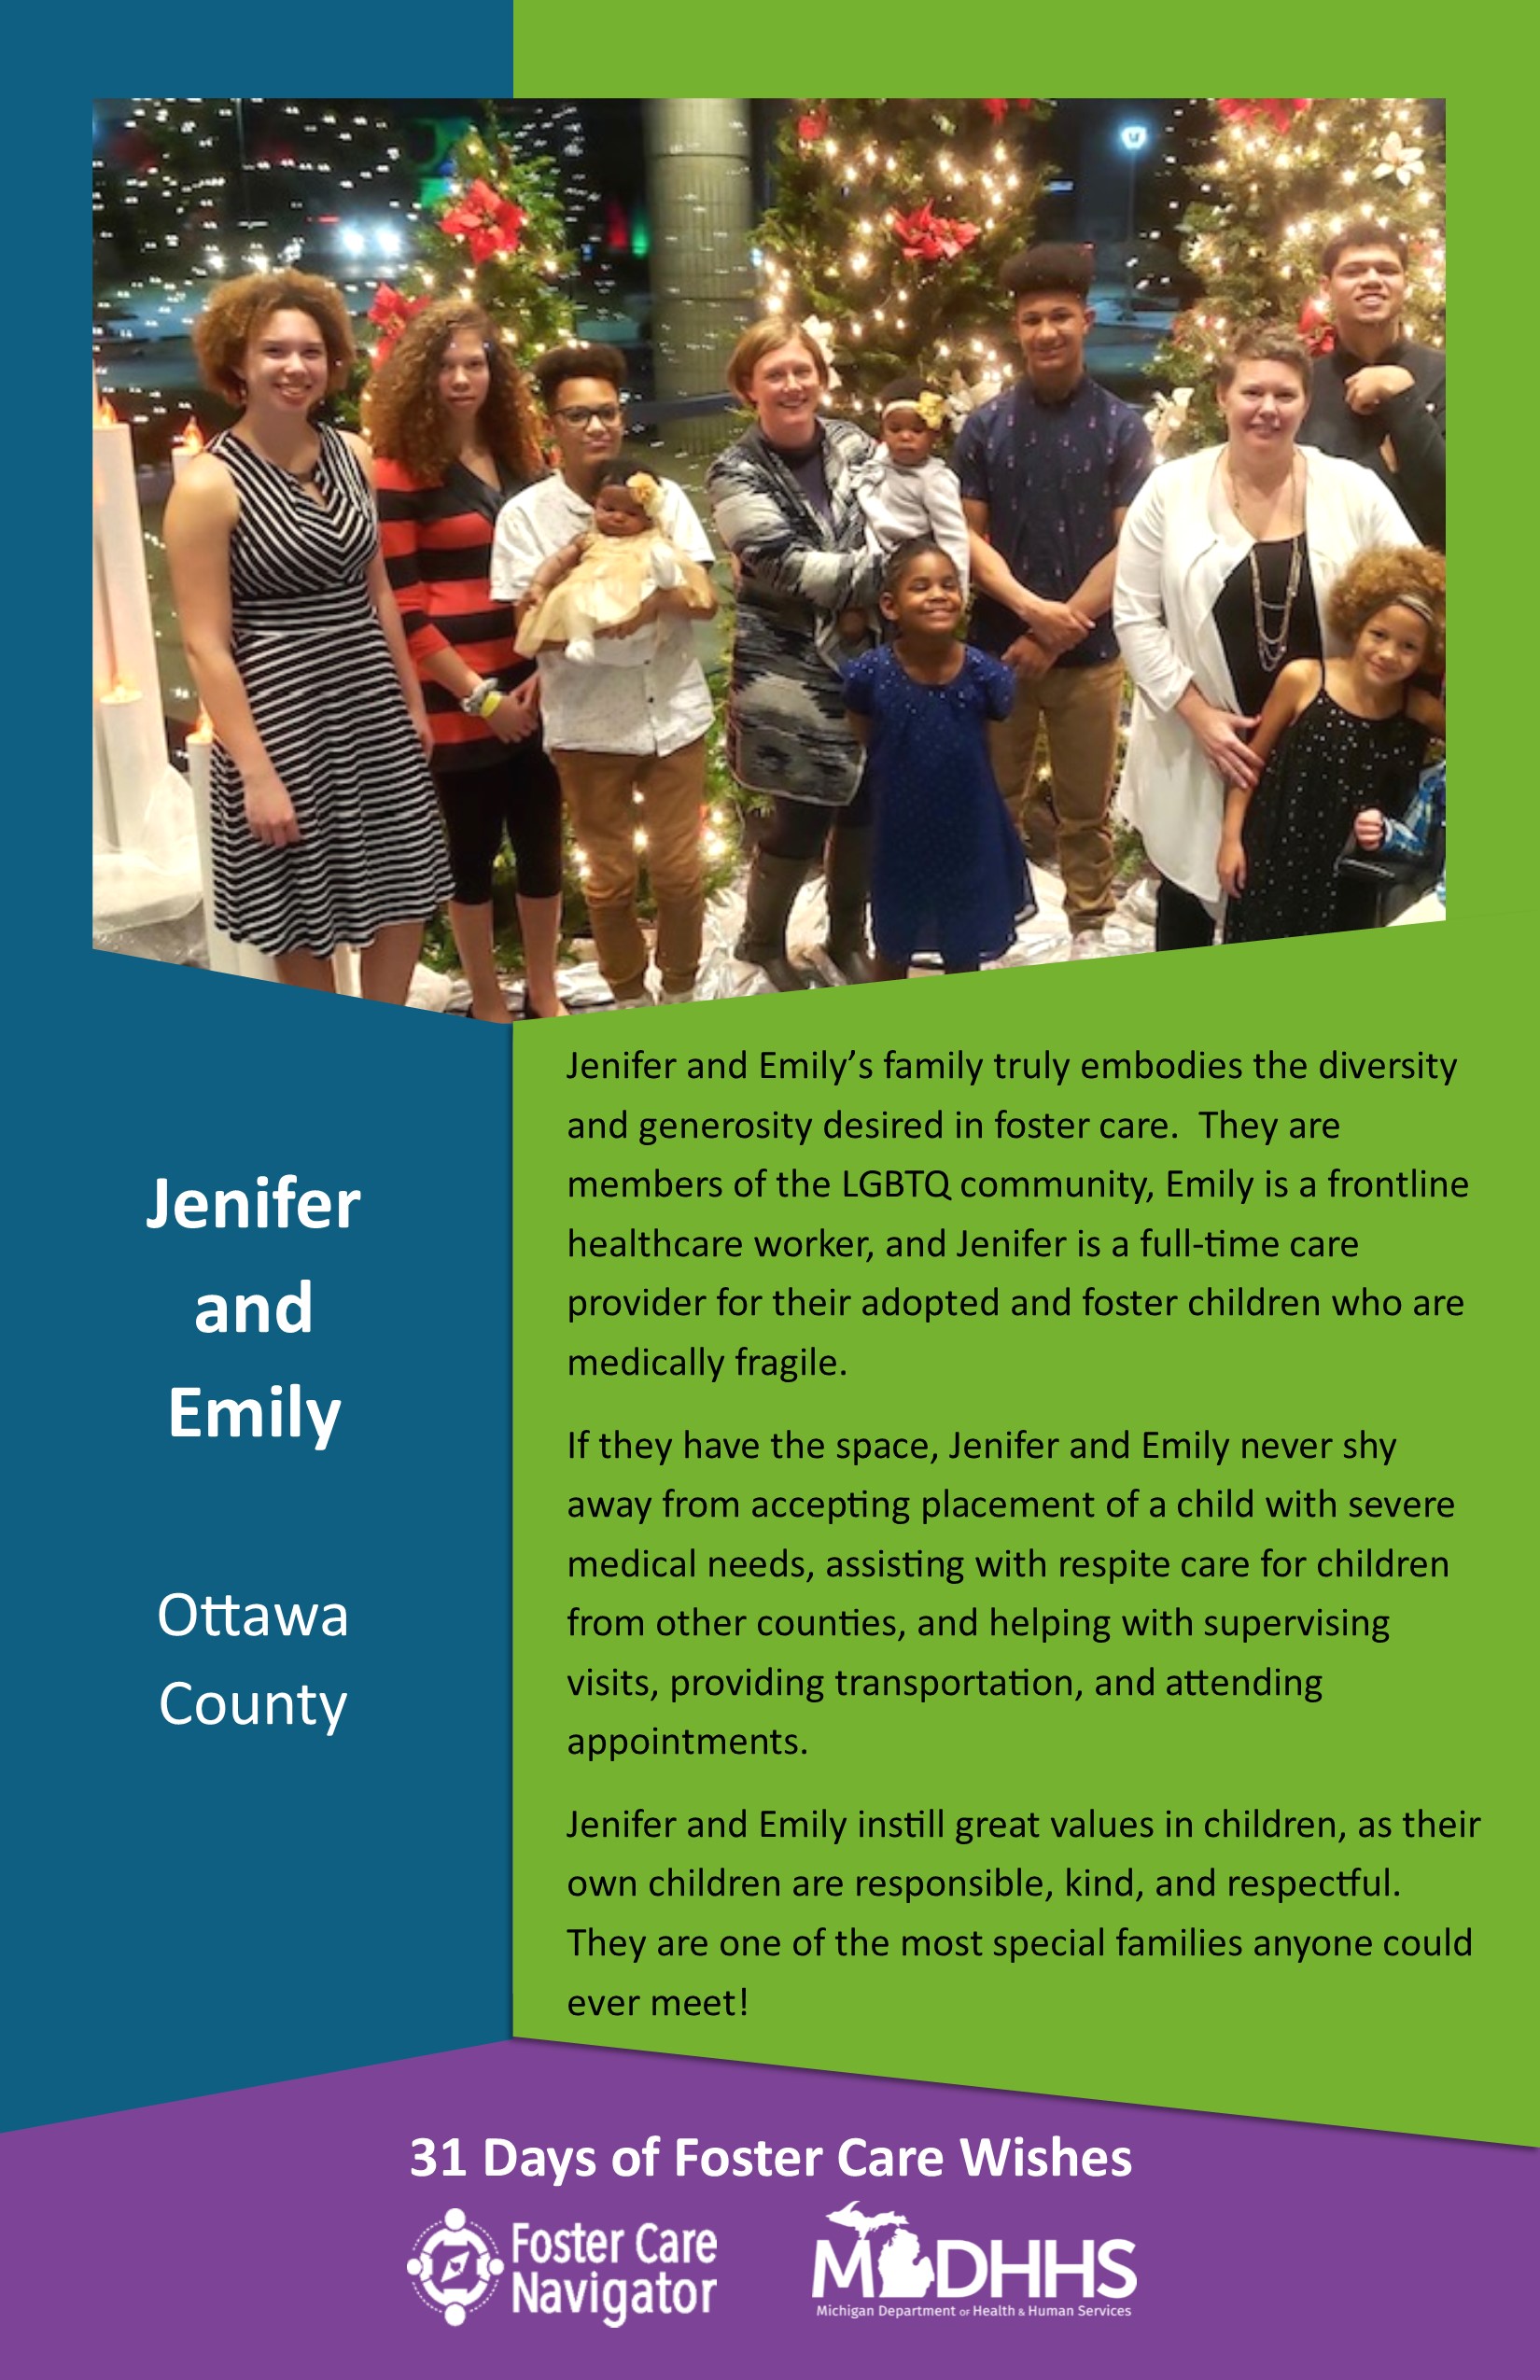 This full page feature includes all of the text listed in the body of this blog post as well as a photo of Jenifer and Emily. The background is blue on the left, green on the right, and purple at the bottom of the page where the logos are located.